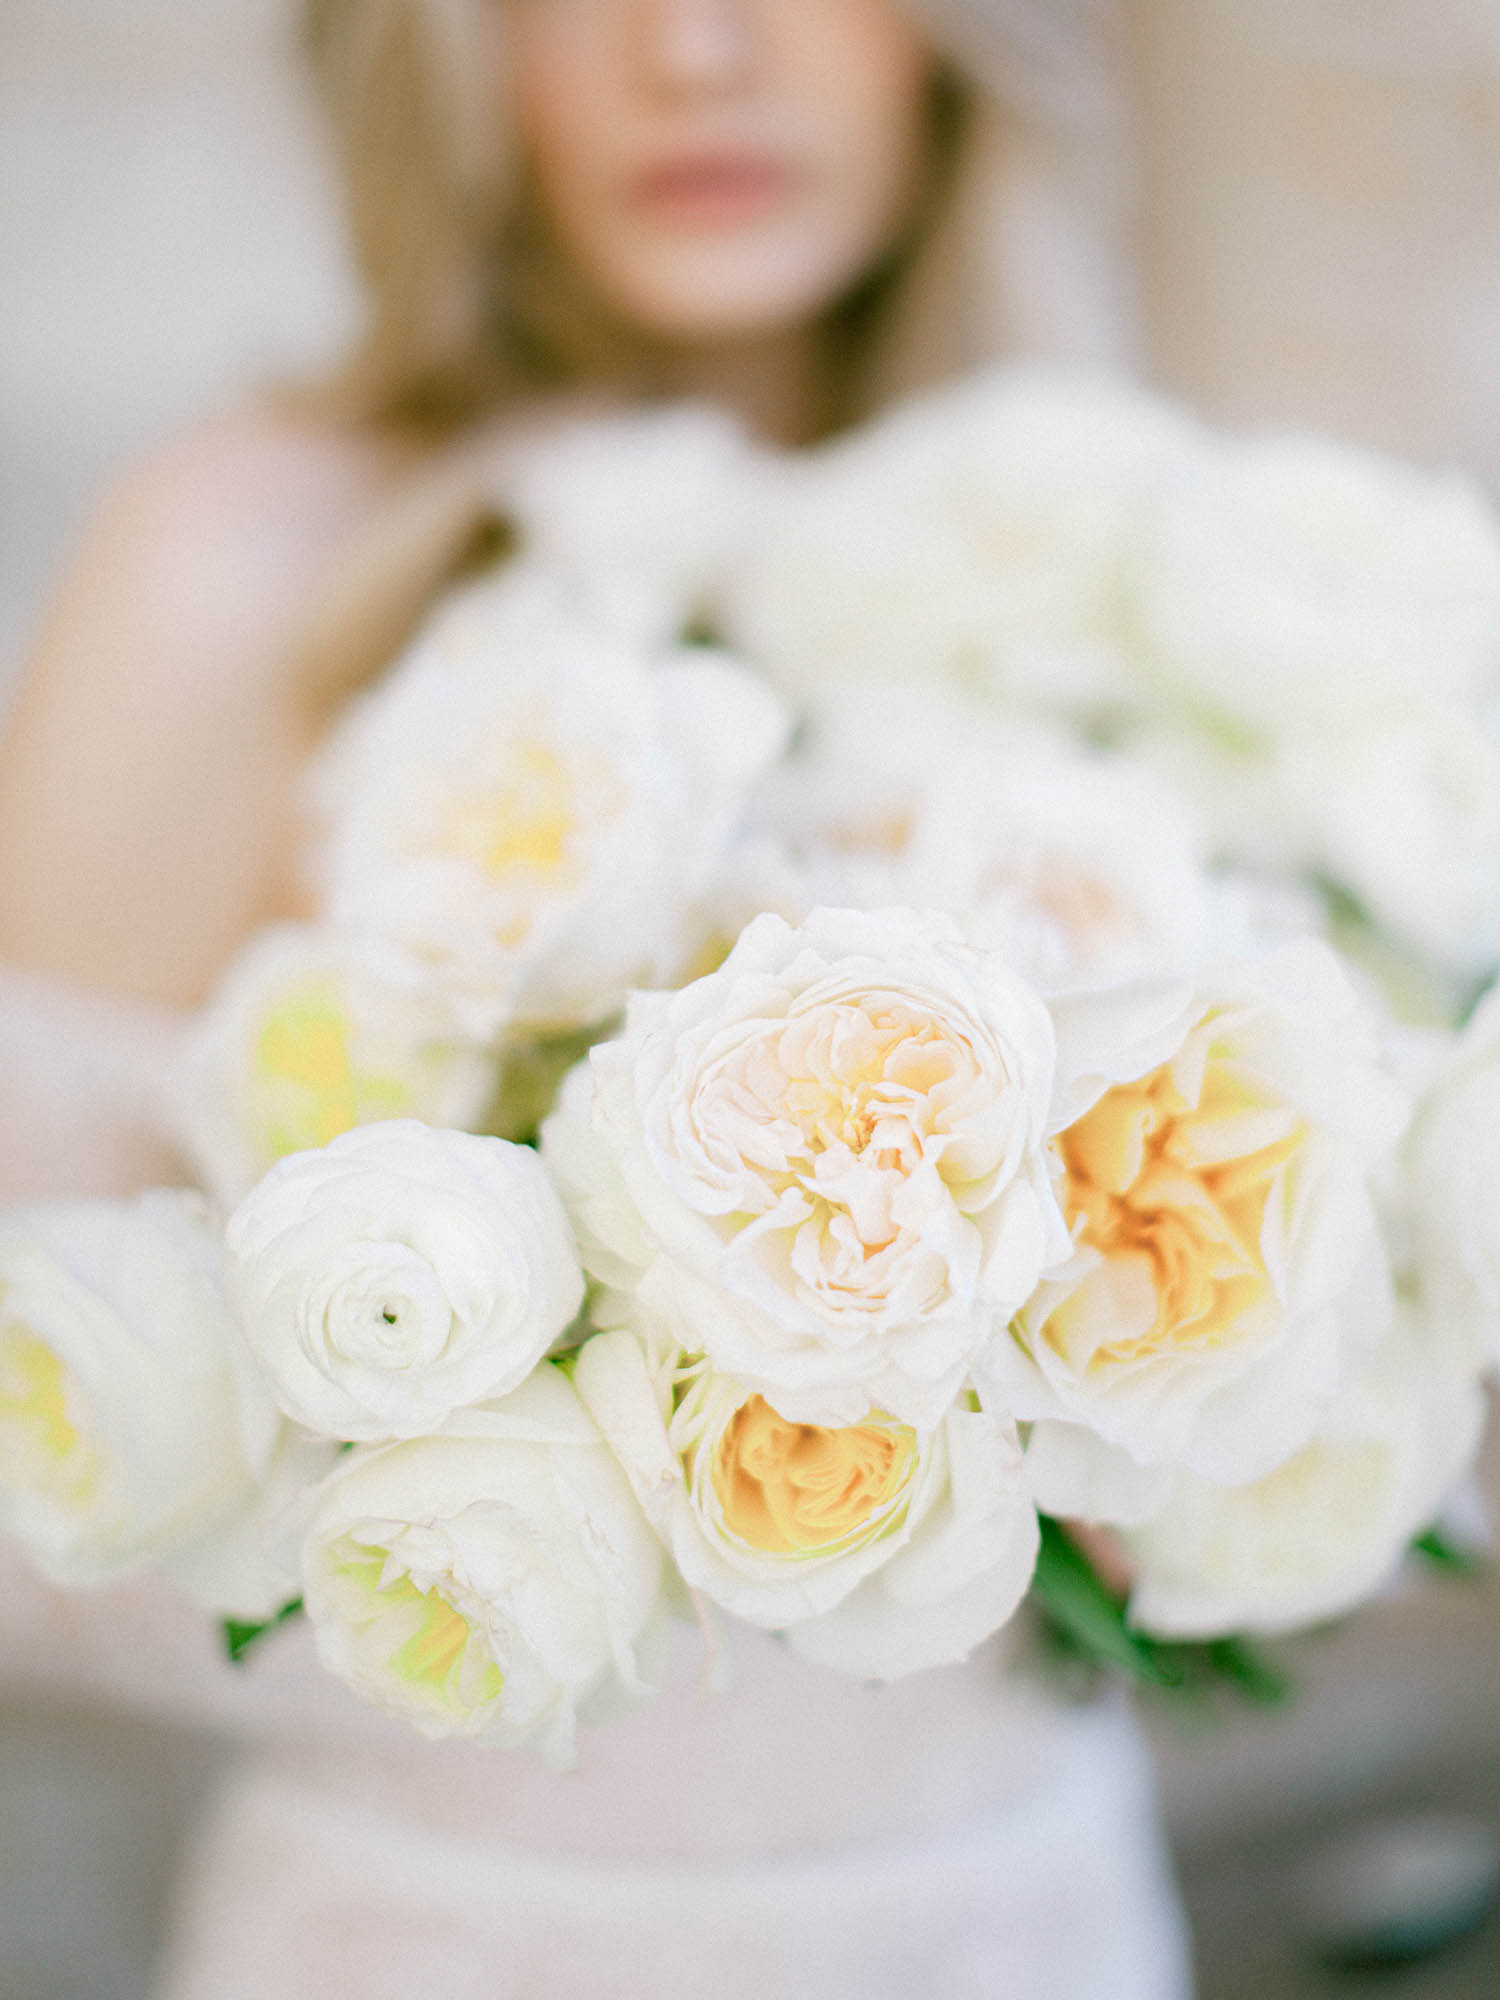 Wedding Bouquet with David Austin Roses